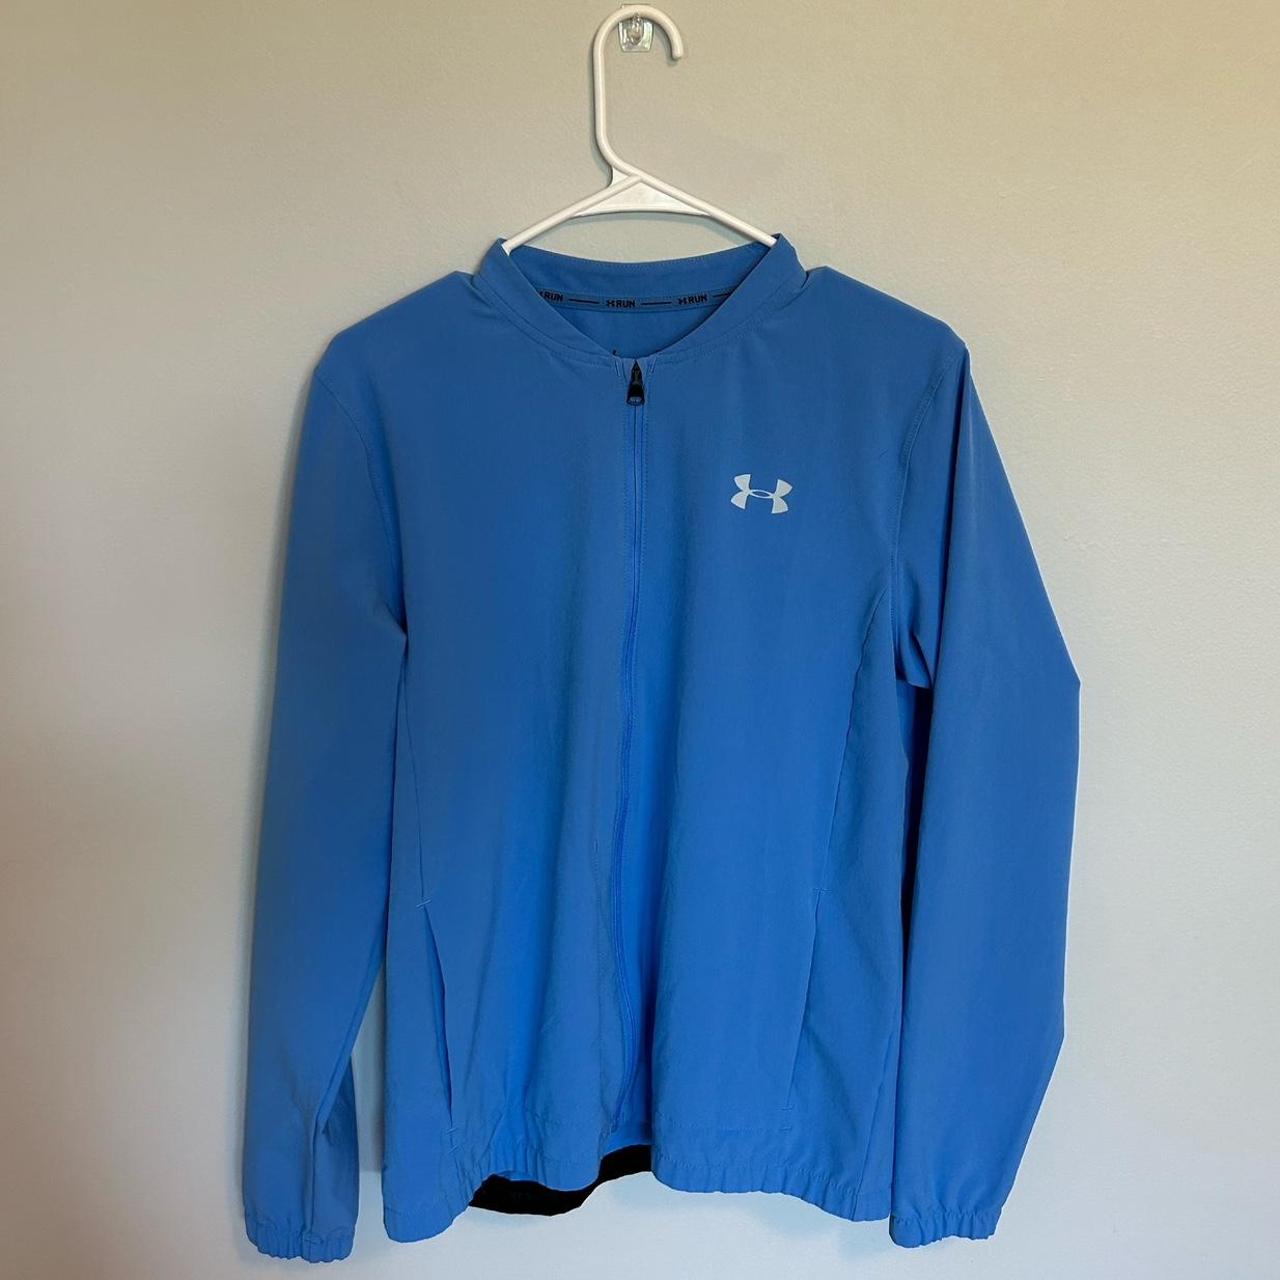 Under Armour fitted blue wind breaker, #UnderArmour